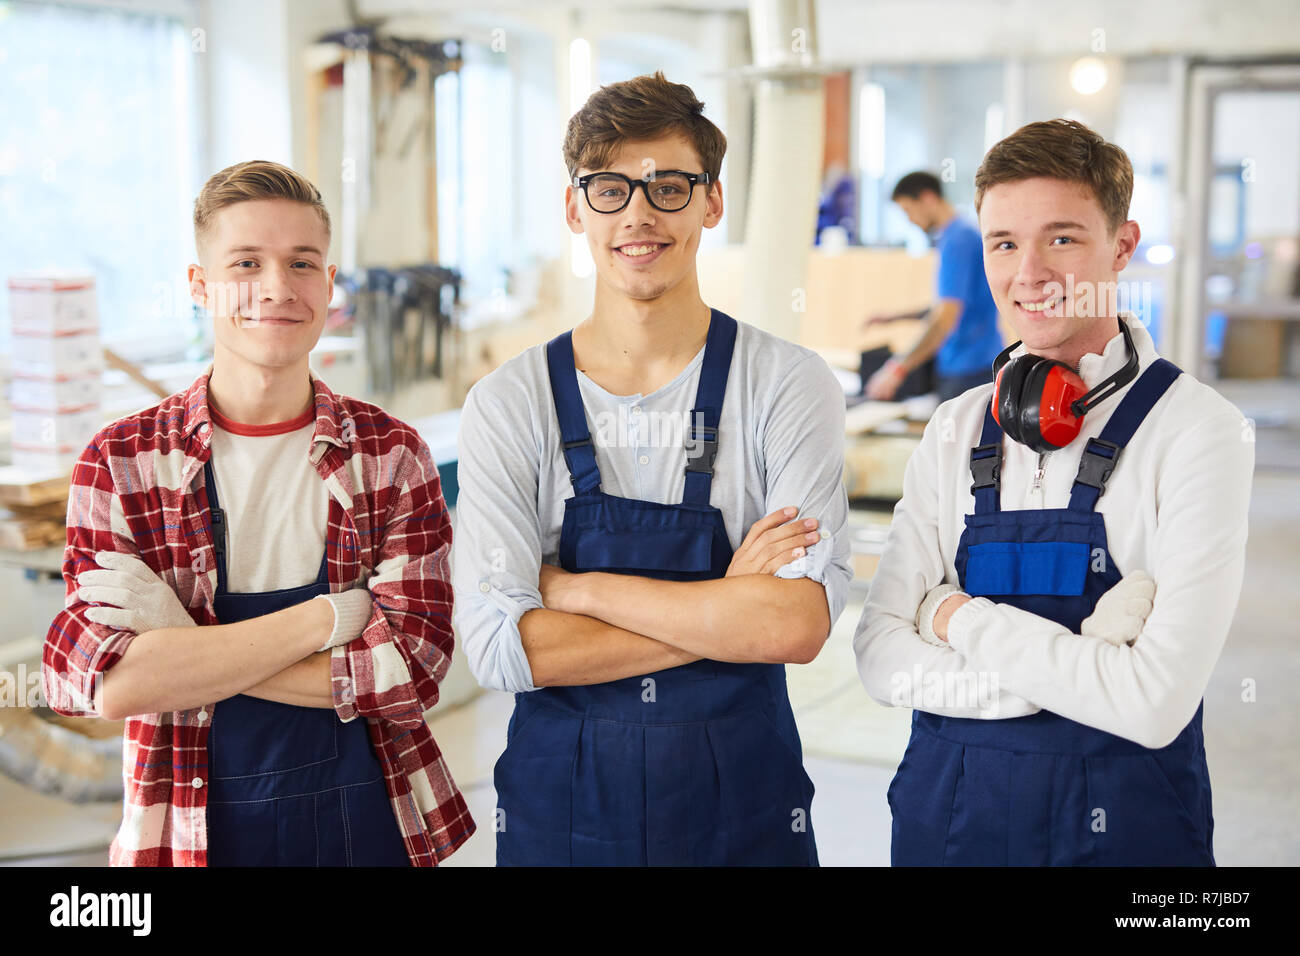 Young carpenter students in workshop Stock Photo